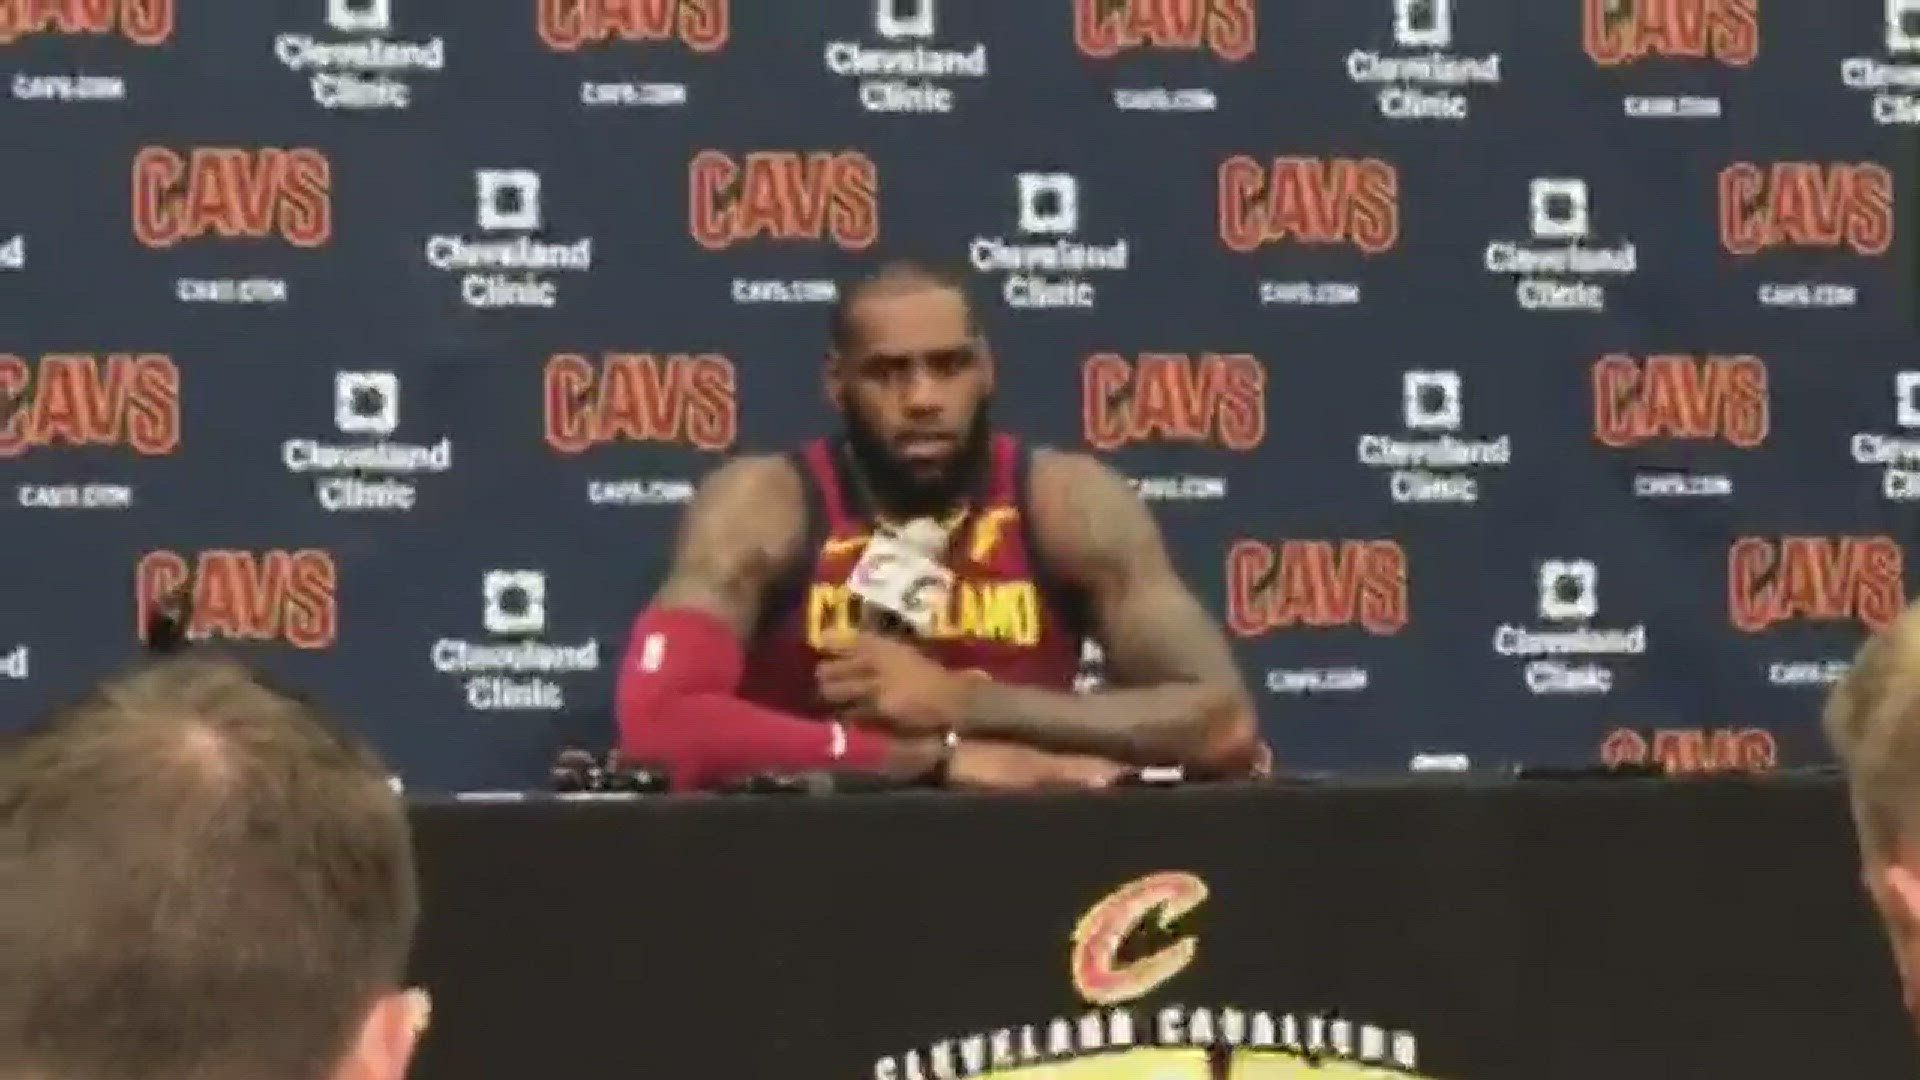 LeBron James discusses his 2018 free agency and addresses whether or not he still intends to finish his career in Cleveland.